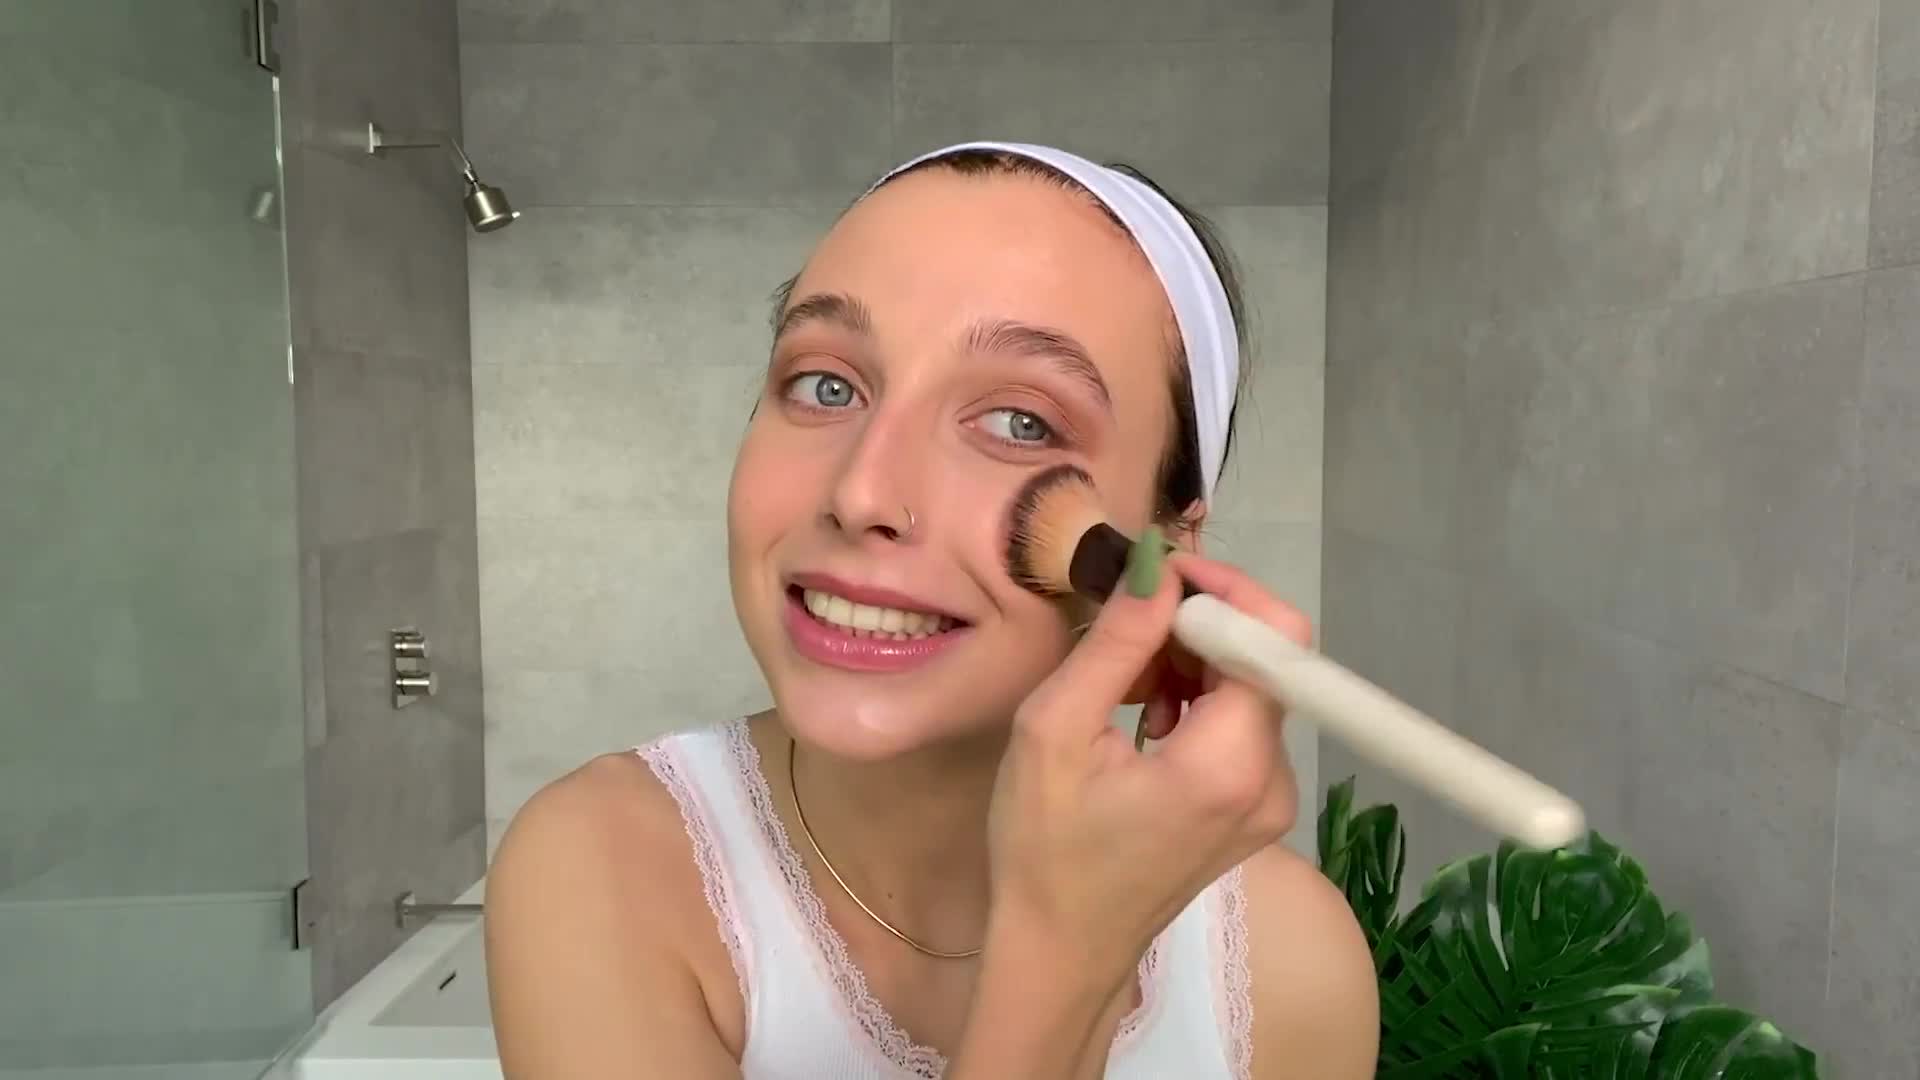 The Ultimate Girl Next Door: Looking Back At Emma Chamberlain's Best Looks